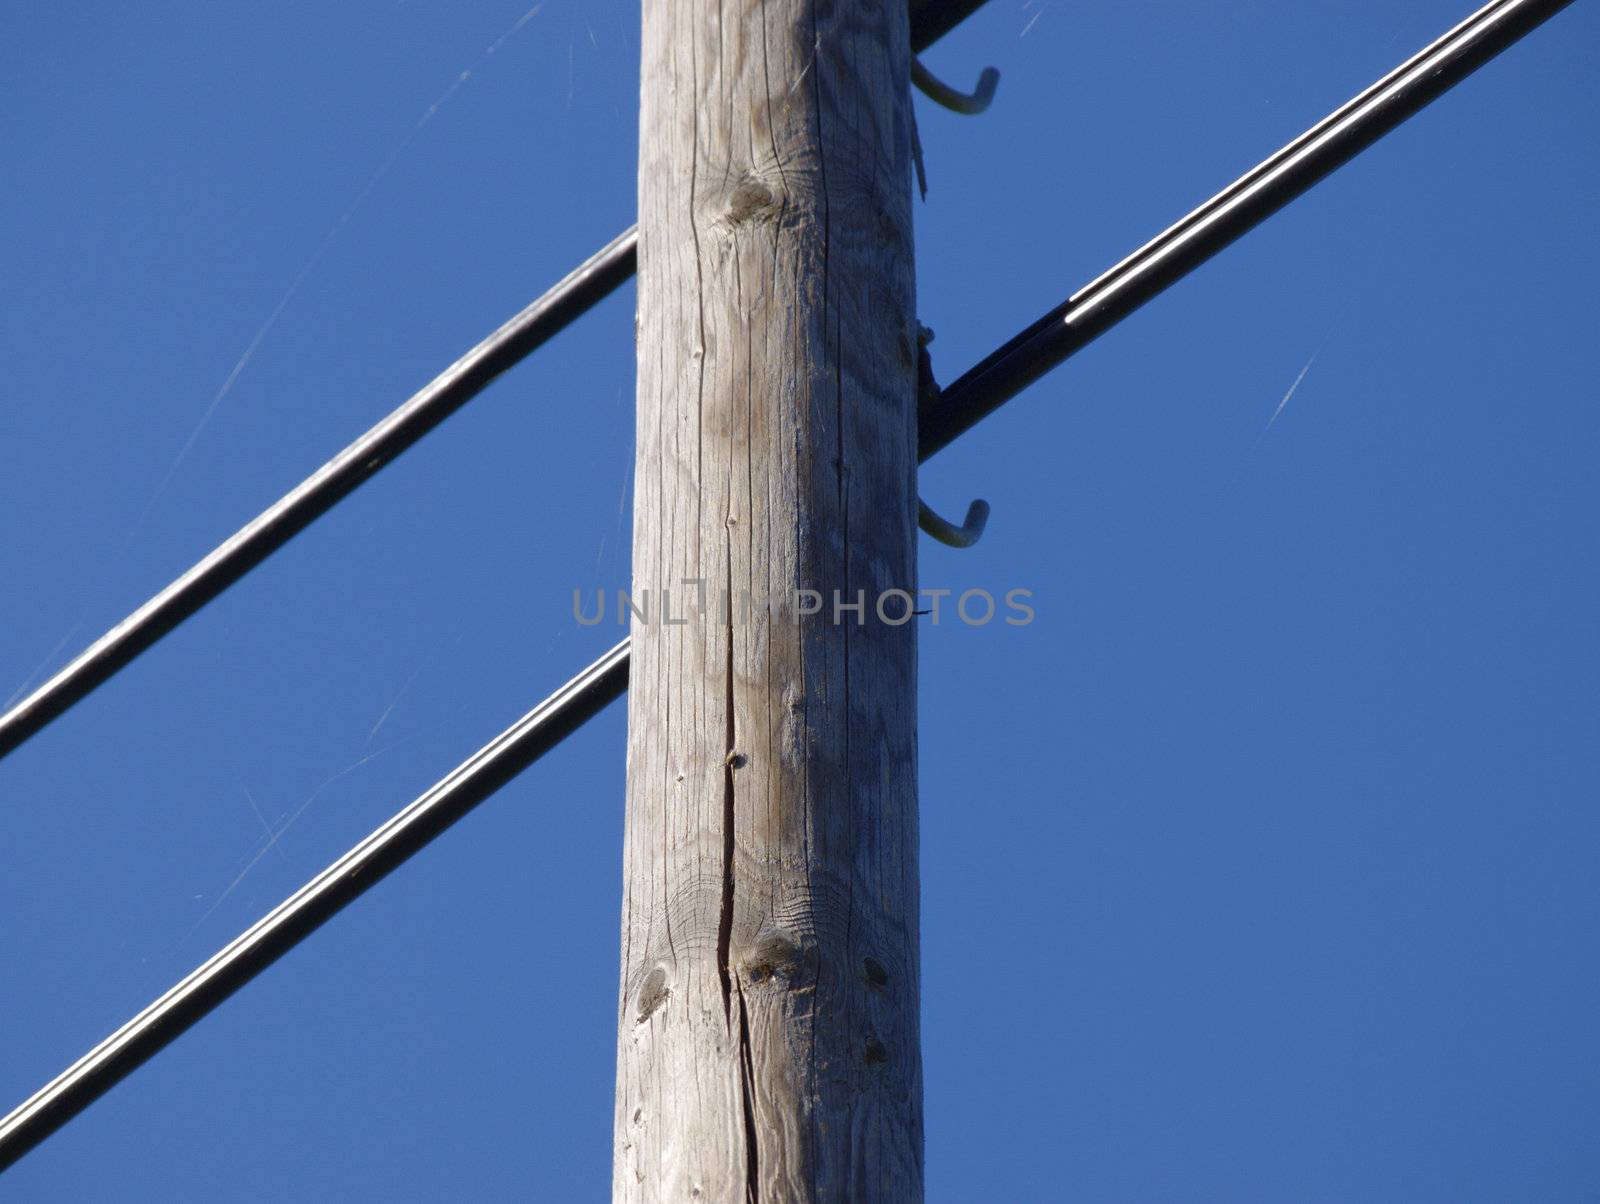 detail of the electric pole by renales